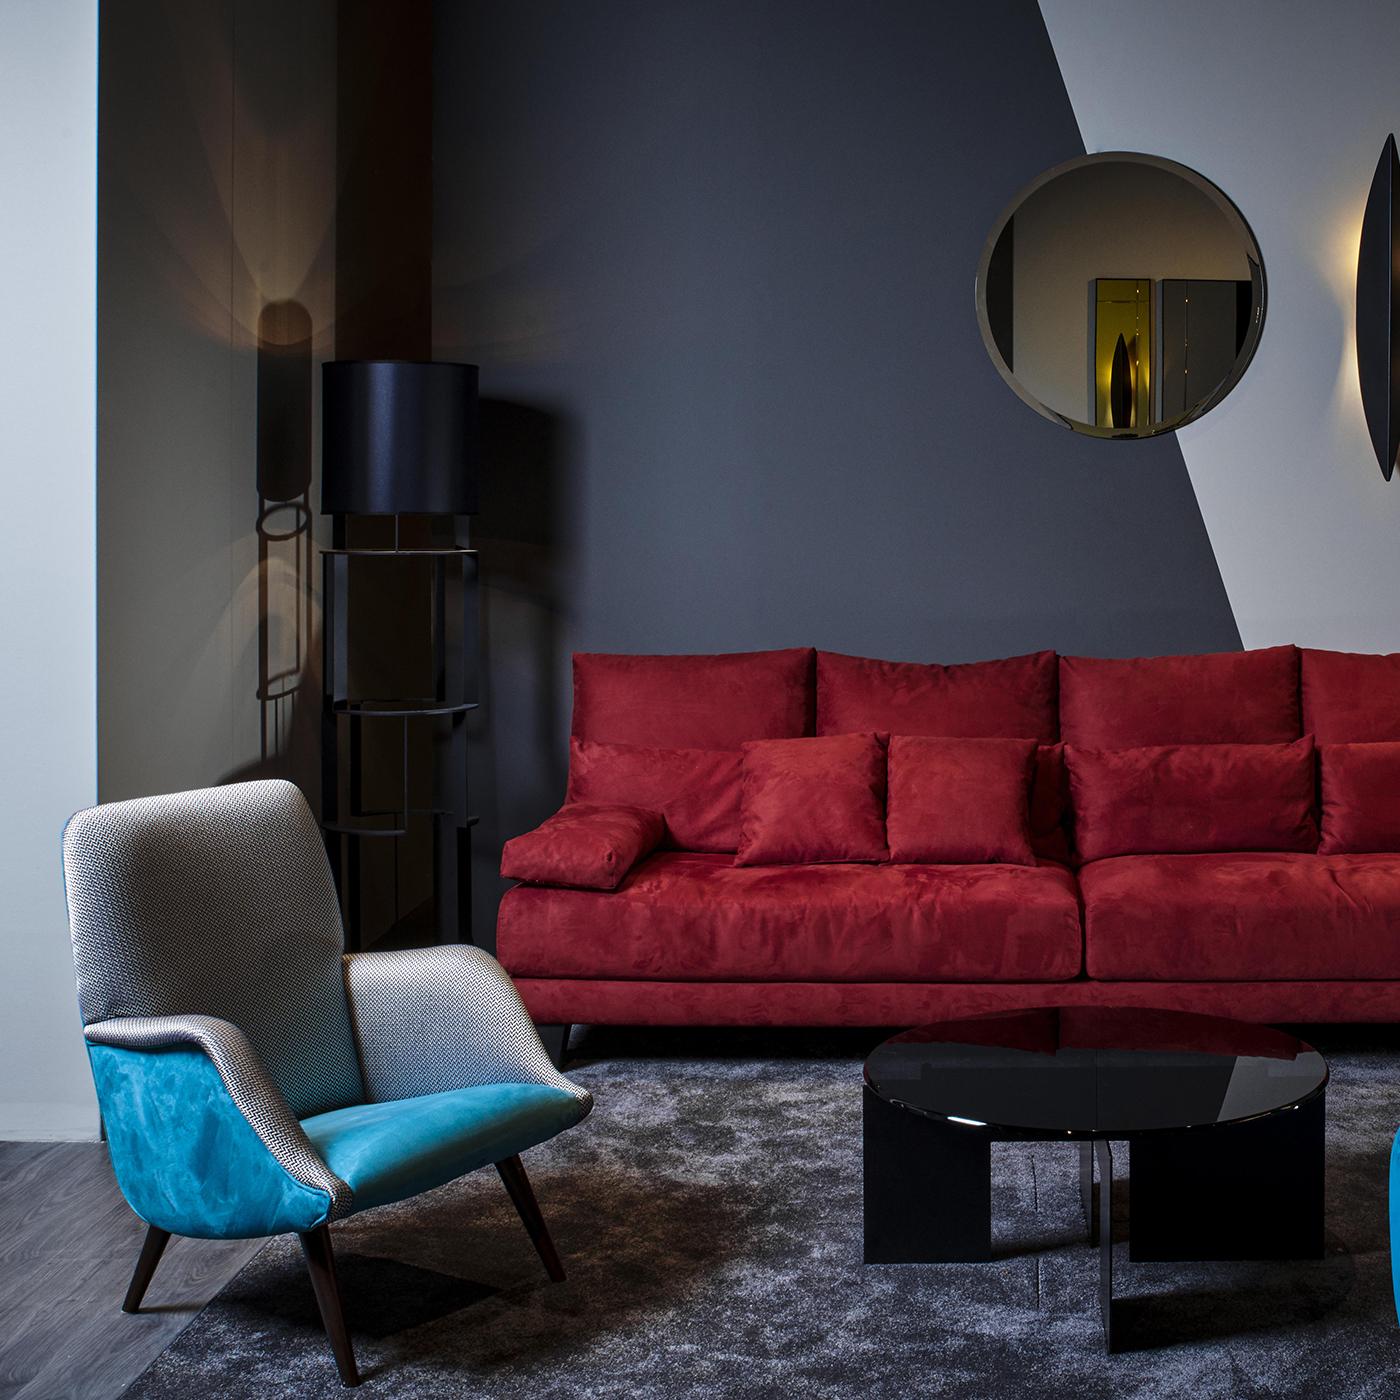 The arms and back of this sleek, cozy armchair are covered in herringbone fabric which stands in contrast to its bright turquoise seat, for an effect that is classic, bold and modern. Its wooden legs have a dark walnut finish. The Chelini Firenze